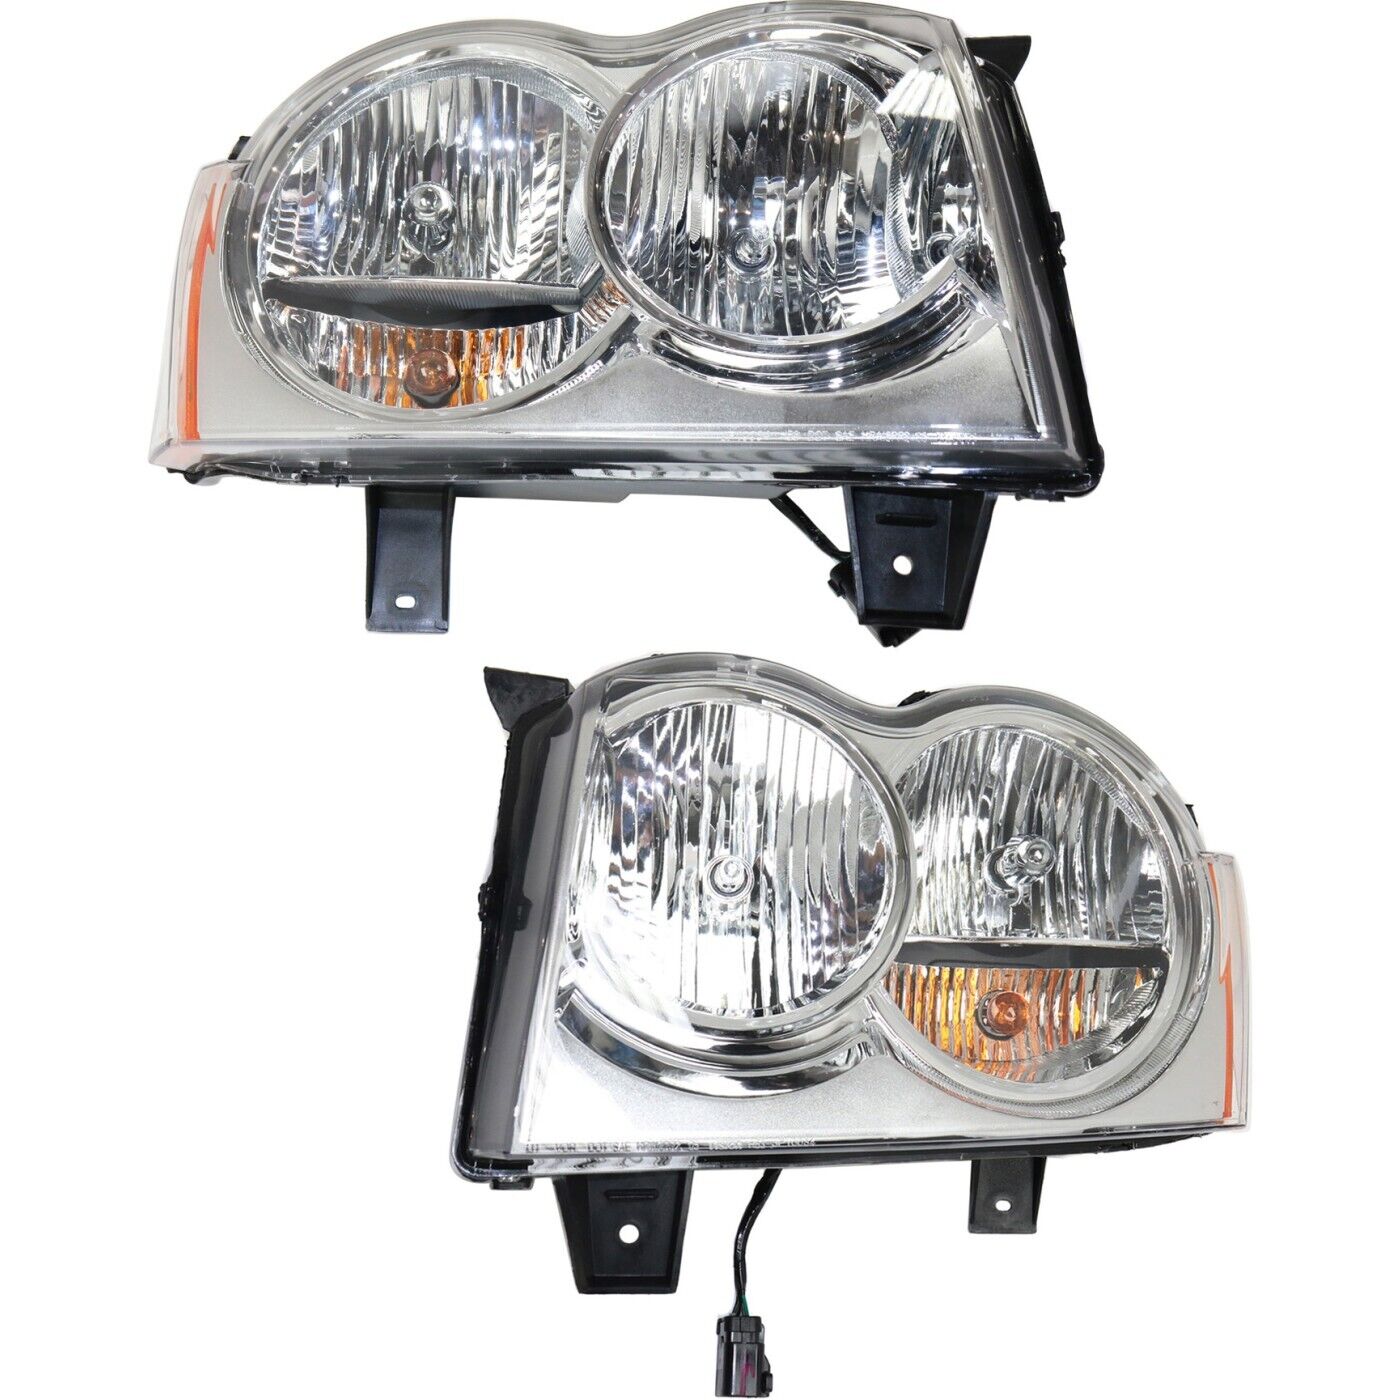 2005-2007 For Jeep Grand Cherokee Headlights Headlamps Pair Left+Right